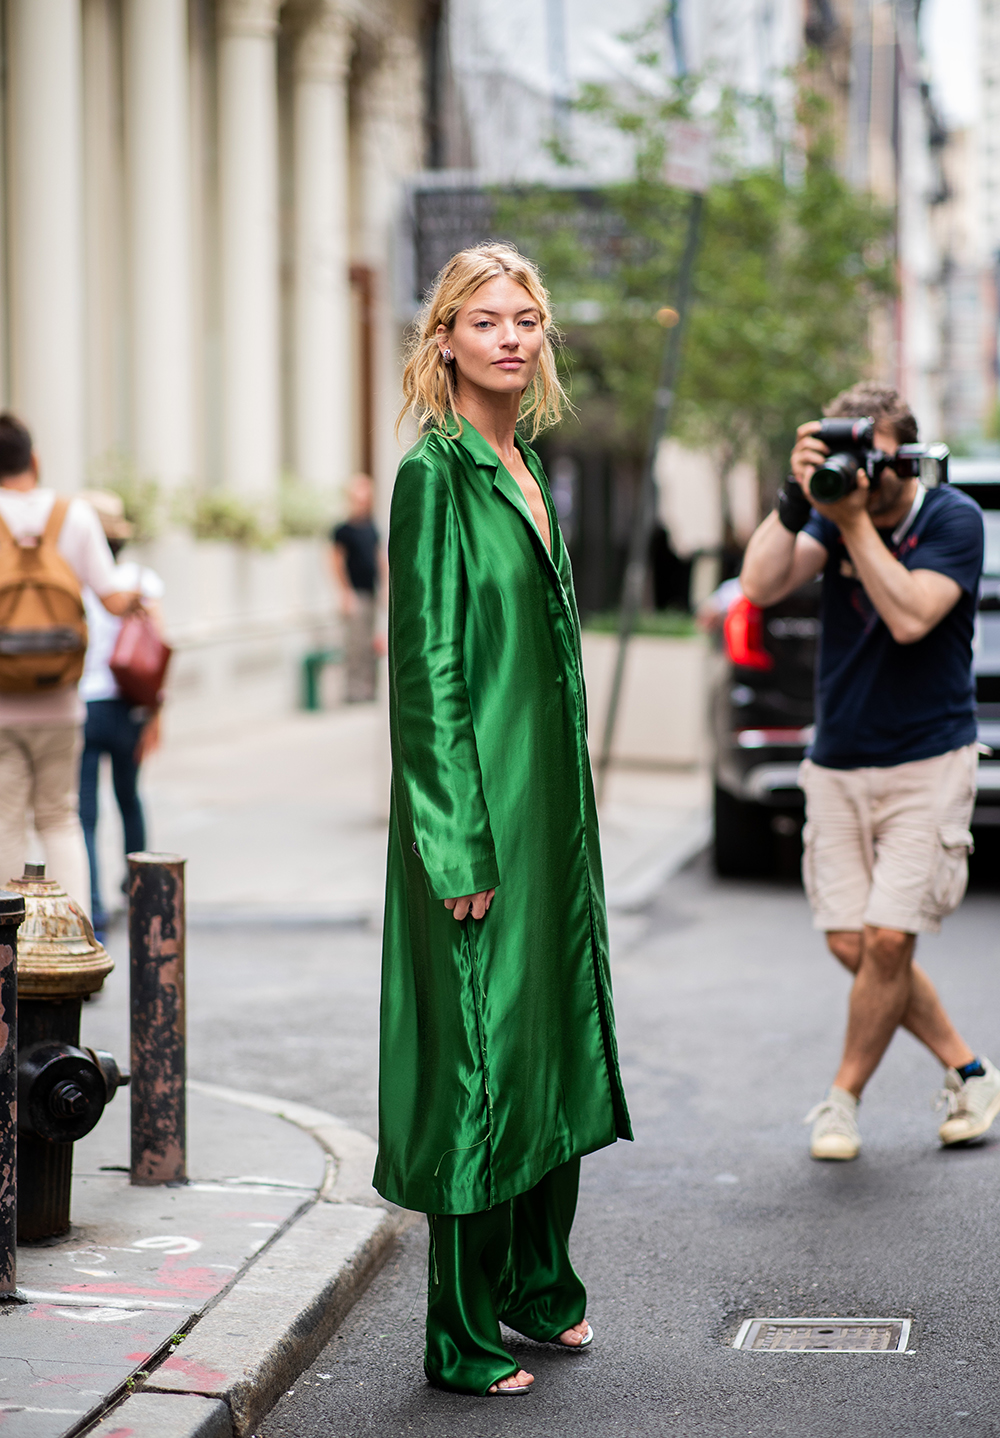 NEW YORK, NY - SEPTEMBER 07: Martha Hunt wearing green button dress and pants seen outside Jason Wu during New York Fashion Week Spring/Summer 2019 on September 7, 2018 in New York City. (Photo by Christian Vierig/Getty Images)